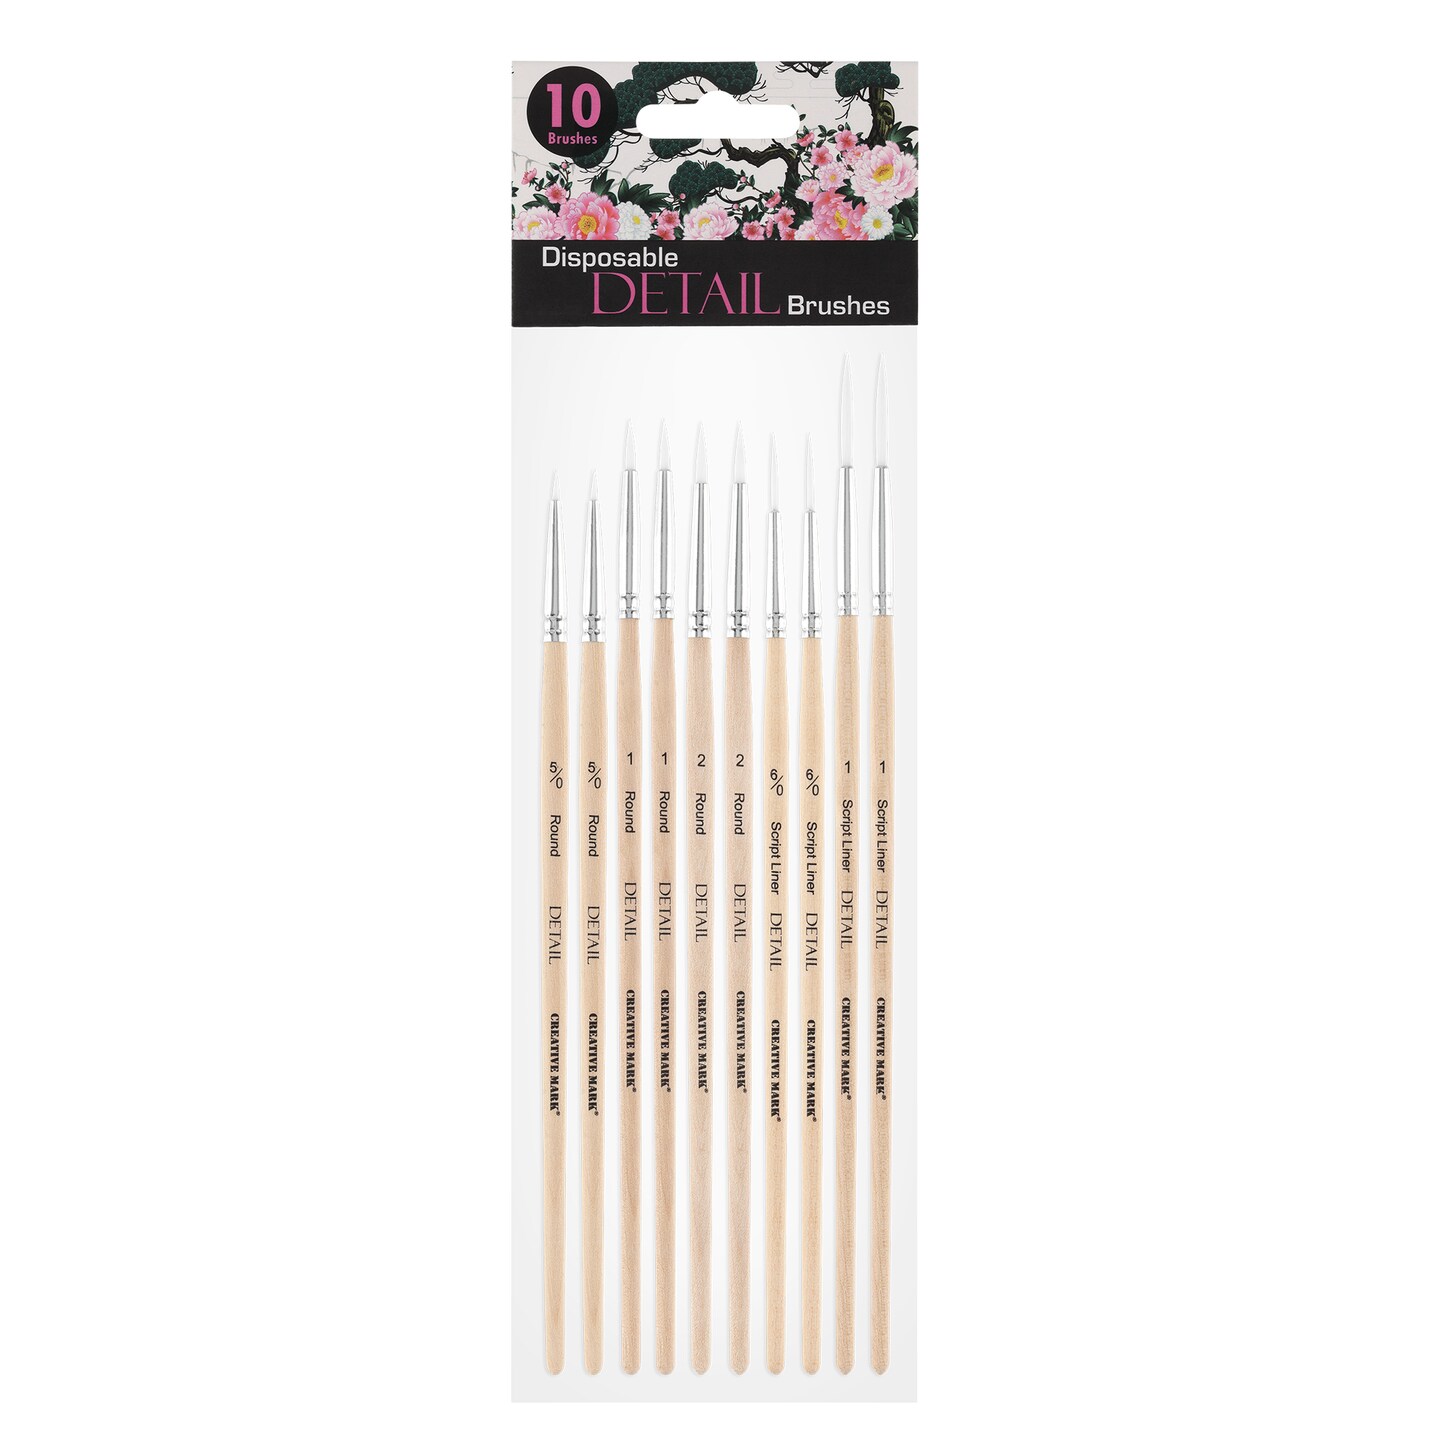 Creative Mark Disposable Detail Brushes - Disposable Detail Brushes for One-Time Use Painting, Commissions, Teachers, Classrooms, &#x26; More! - Set of 10